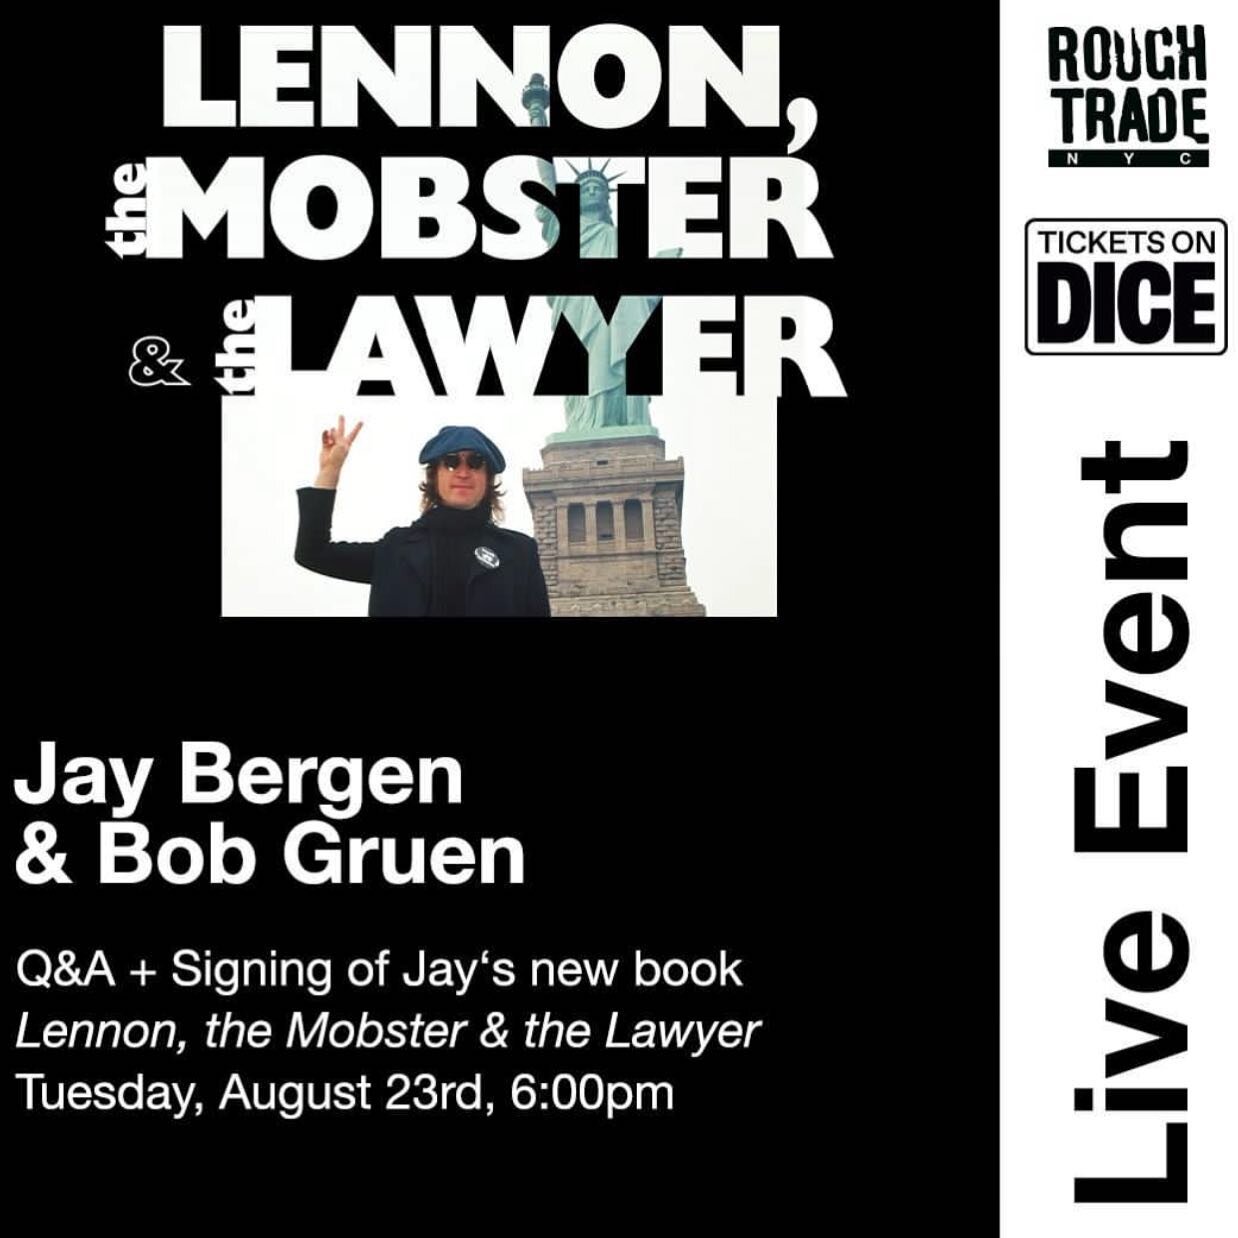 Had a wonderful and exciting trip to Chicago and will be sharing some memories soon, but wanted to remind you all that I will be at Rough Trade NYC for book signing and a Q&amp;A with the legendary @bob_gruen! I hope you can make it!